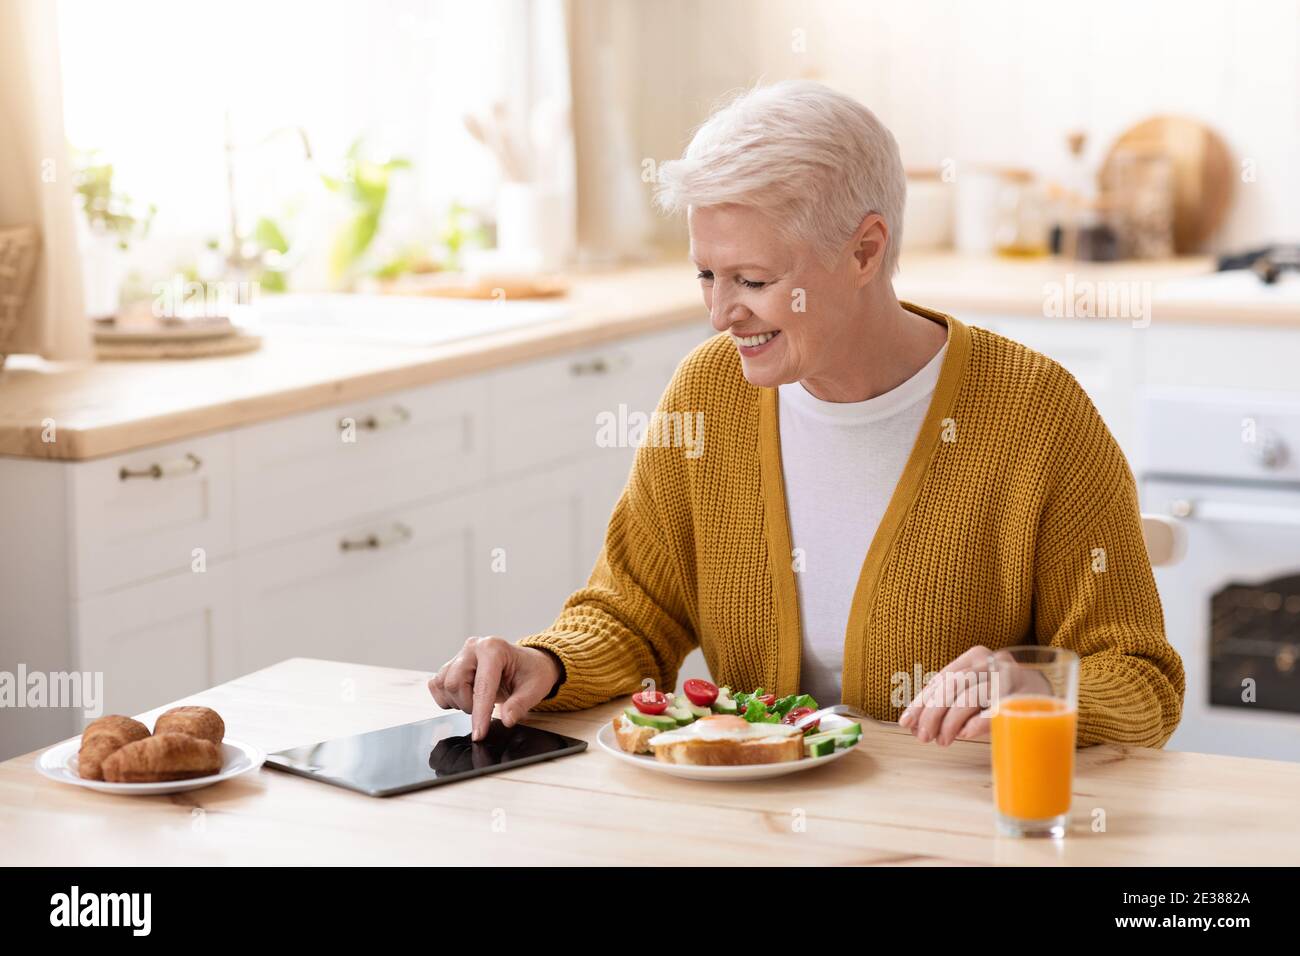 Smiling old lady using digital tablet while having lunch Stock Photo